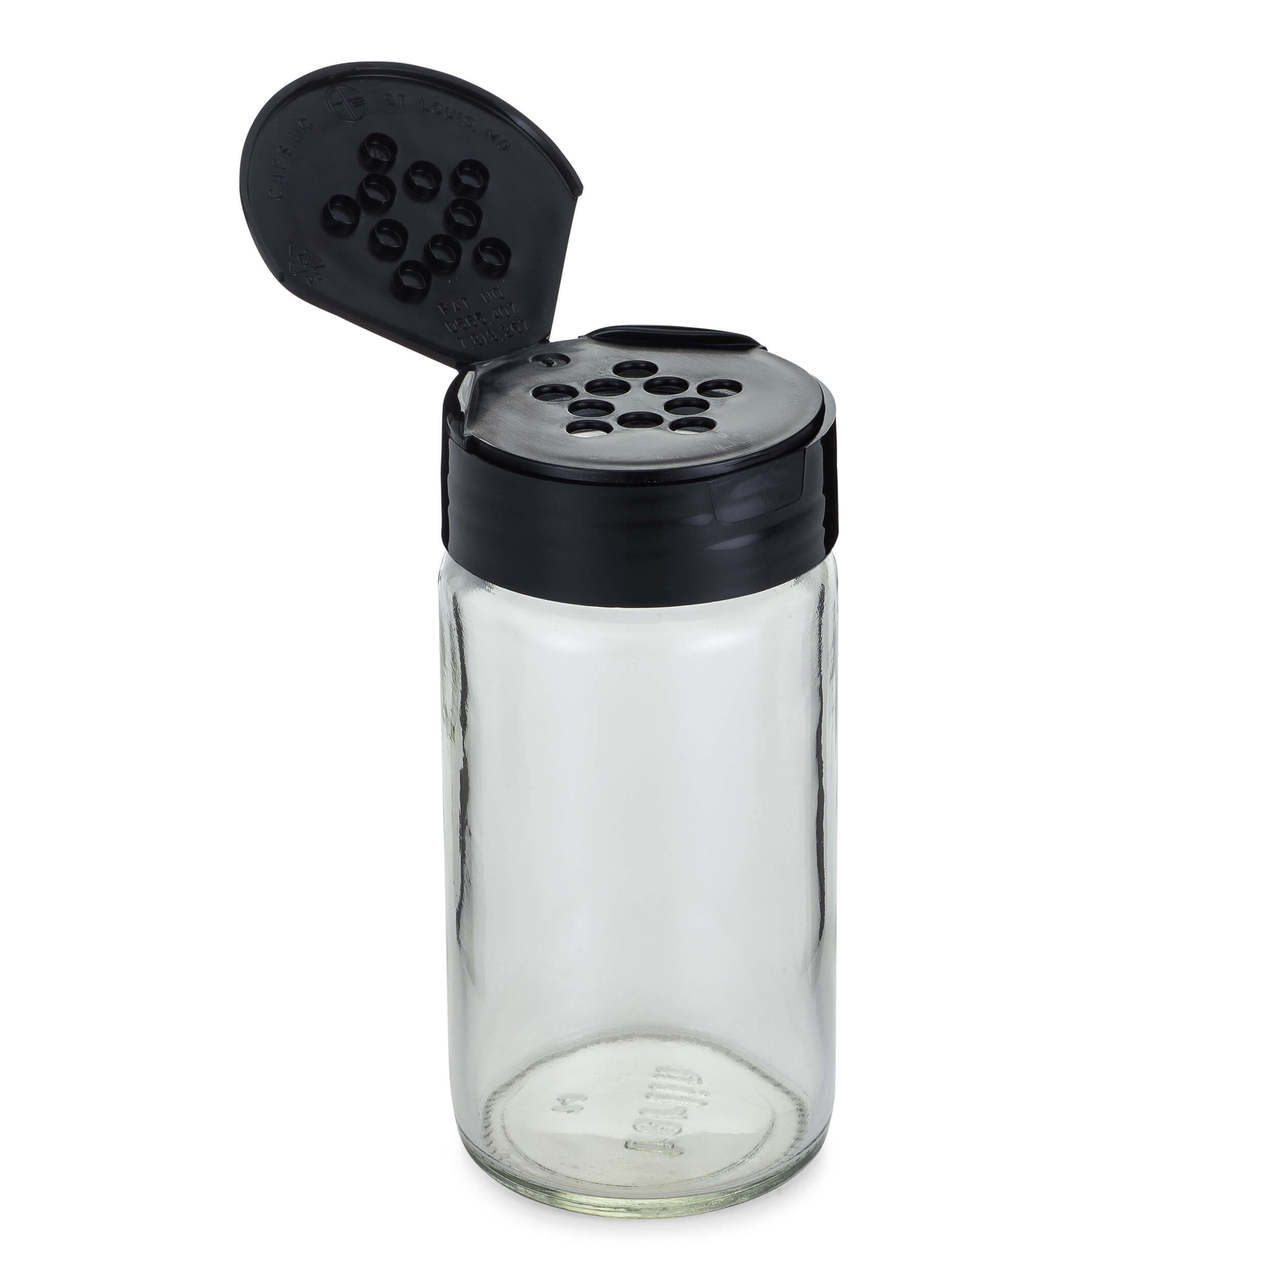 Clear Glass Square Spice Jar with Black Two Sided Sifter - 8 oz / 240 ml